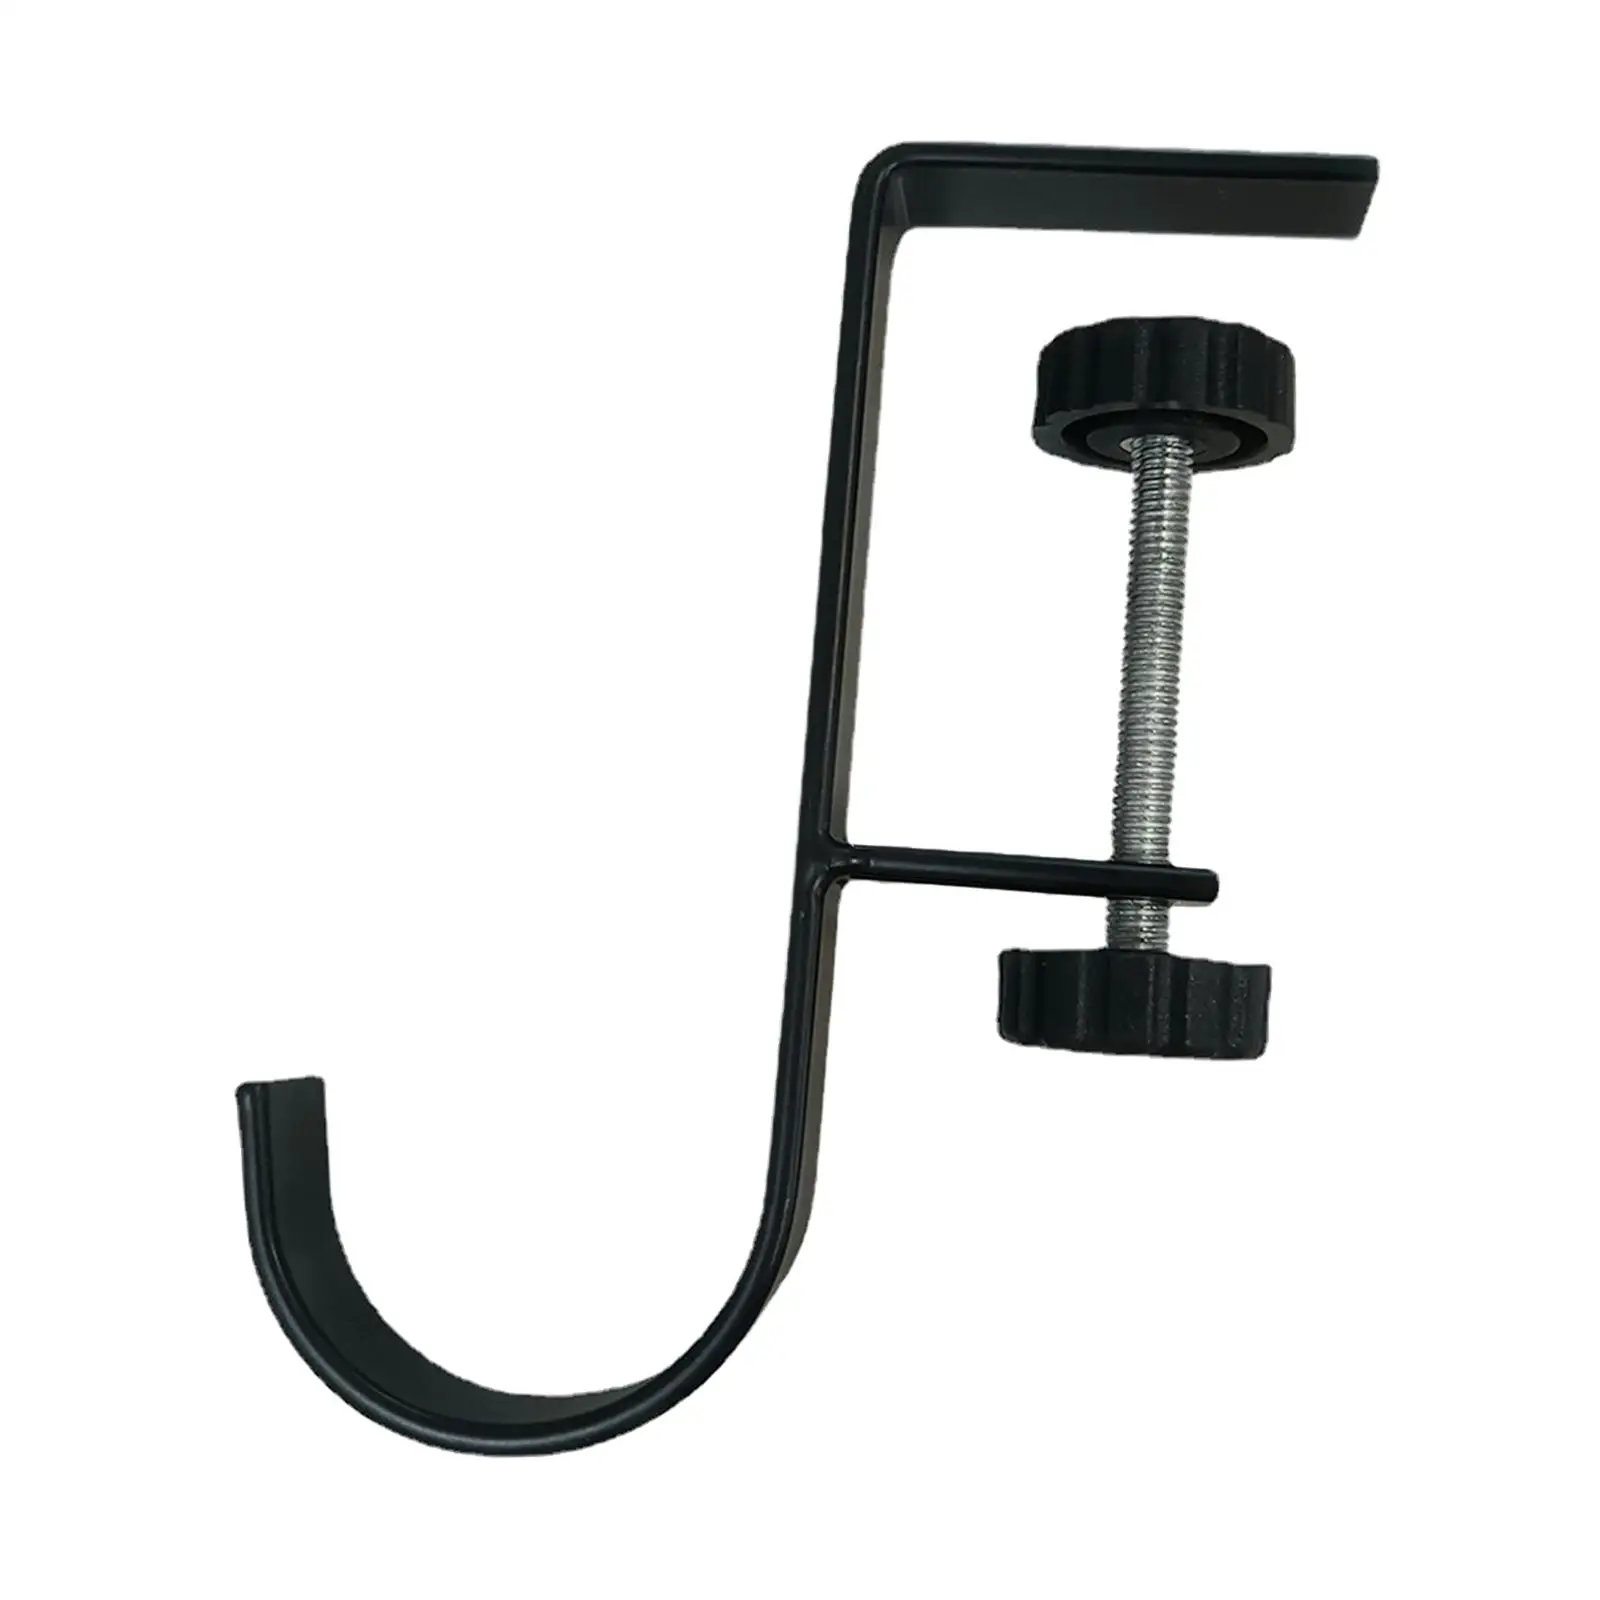 Headset Holder Desk Mount Display Rack Table Clamp Cable Clip Organizer under Desk AntiSlip Rotating Arm Clamp Headphone Stand